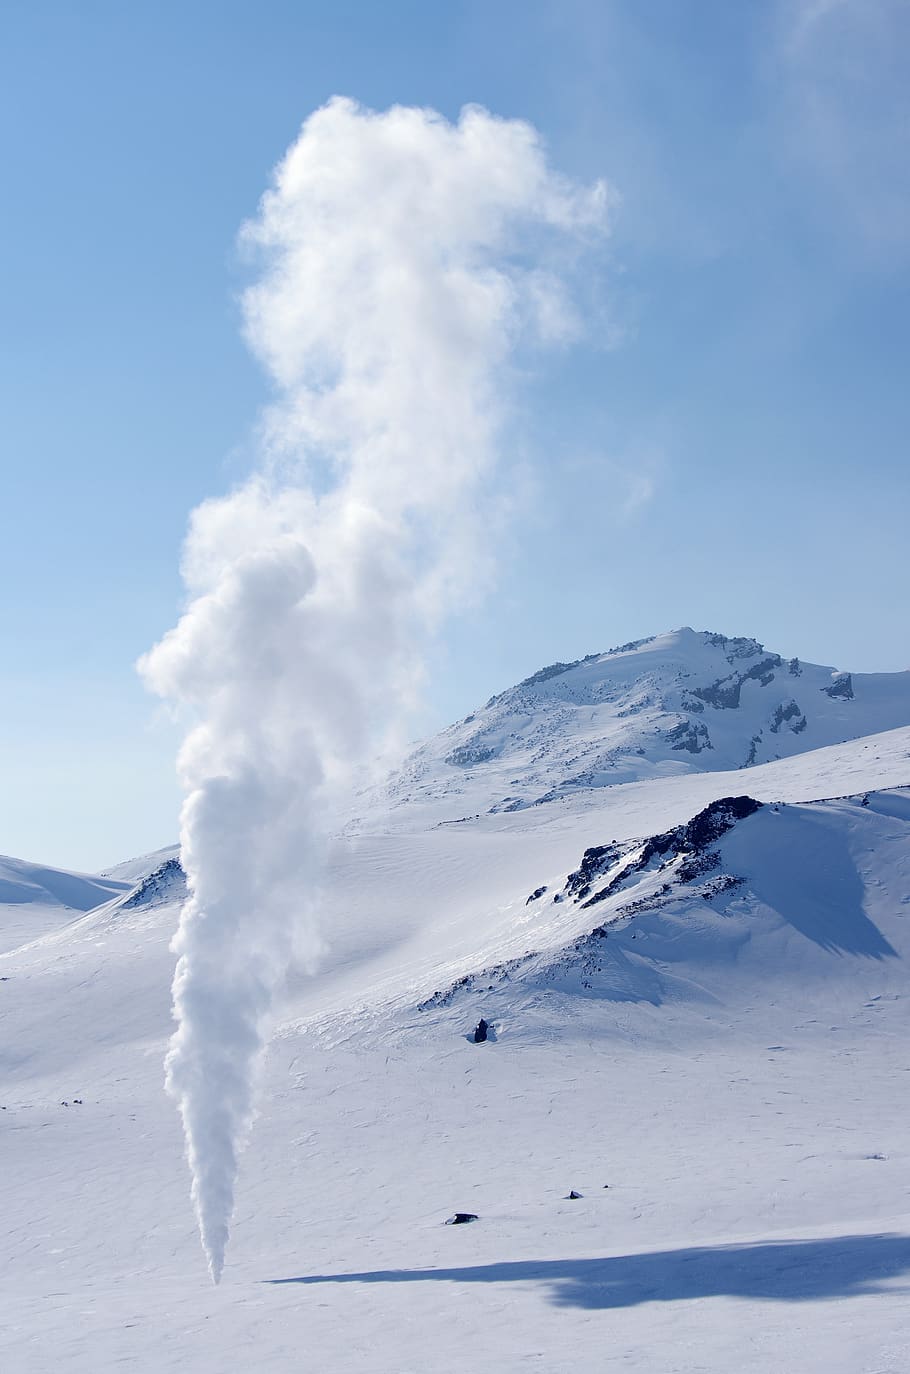 pairs, jet, post, fumarole, well, thermal spring, hot land, kamchatka, the mutnovsky volcano, snow